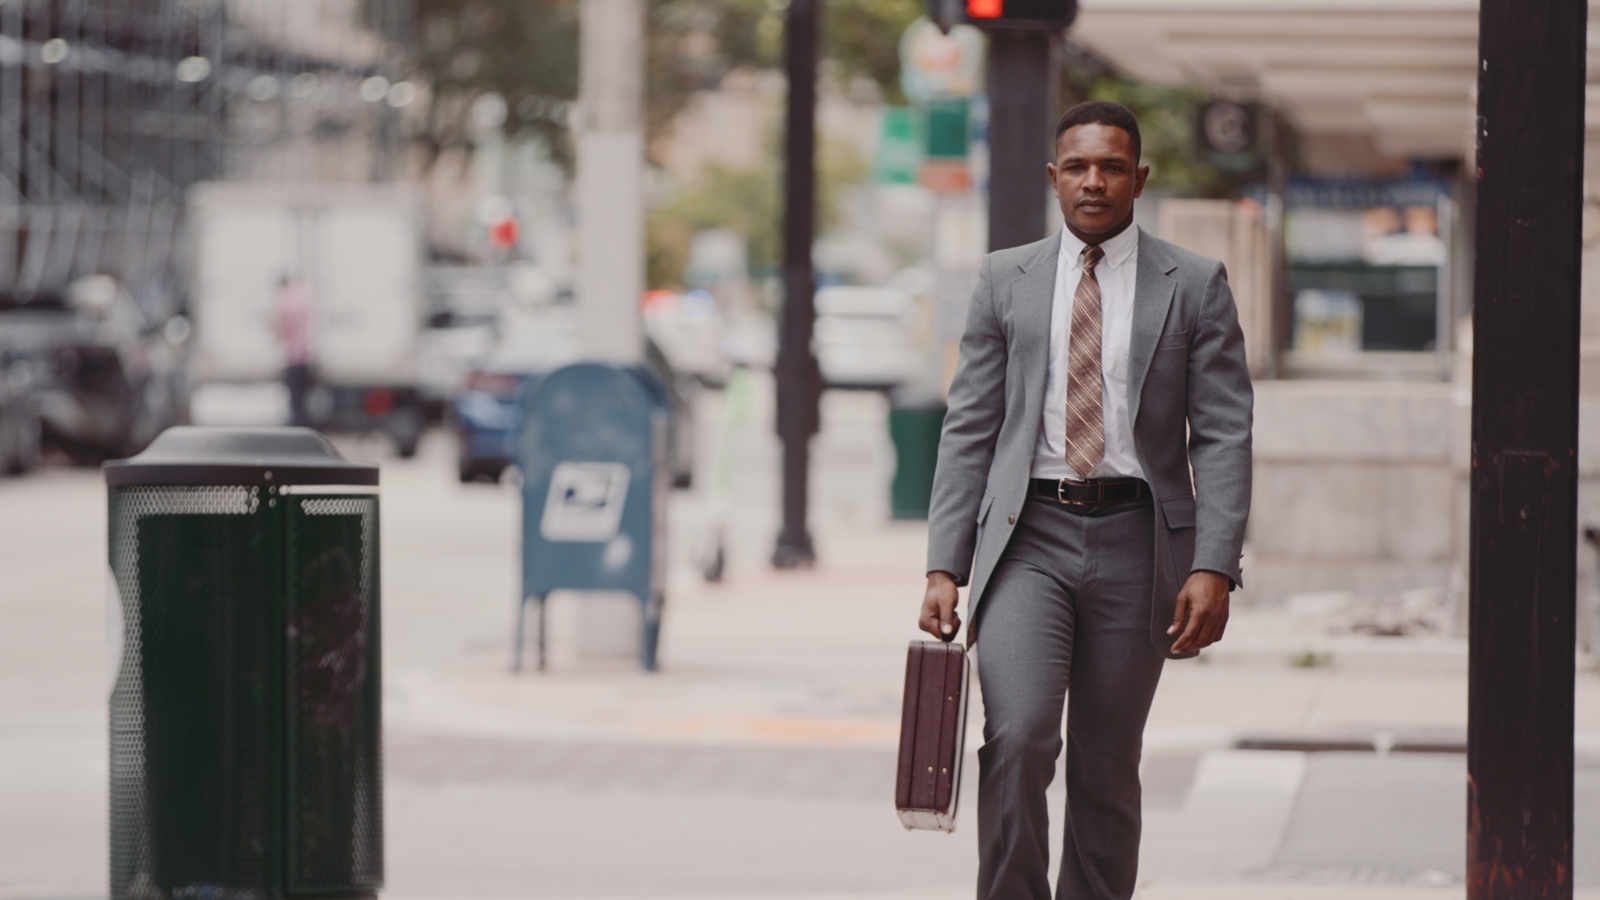 African American man walking down a city street wearing a gray suit carrying a brown briefcase